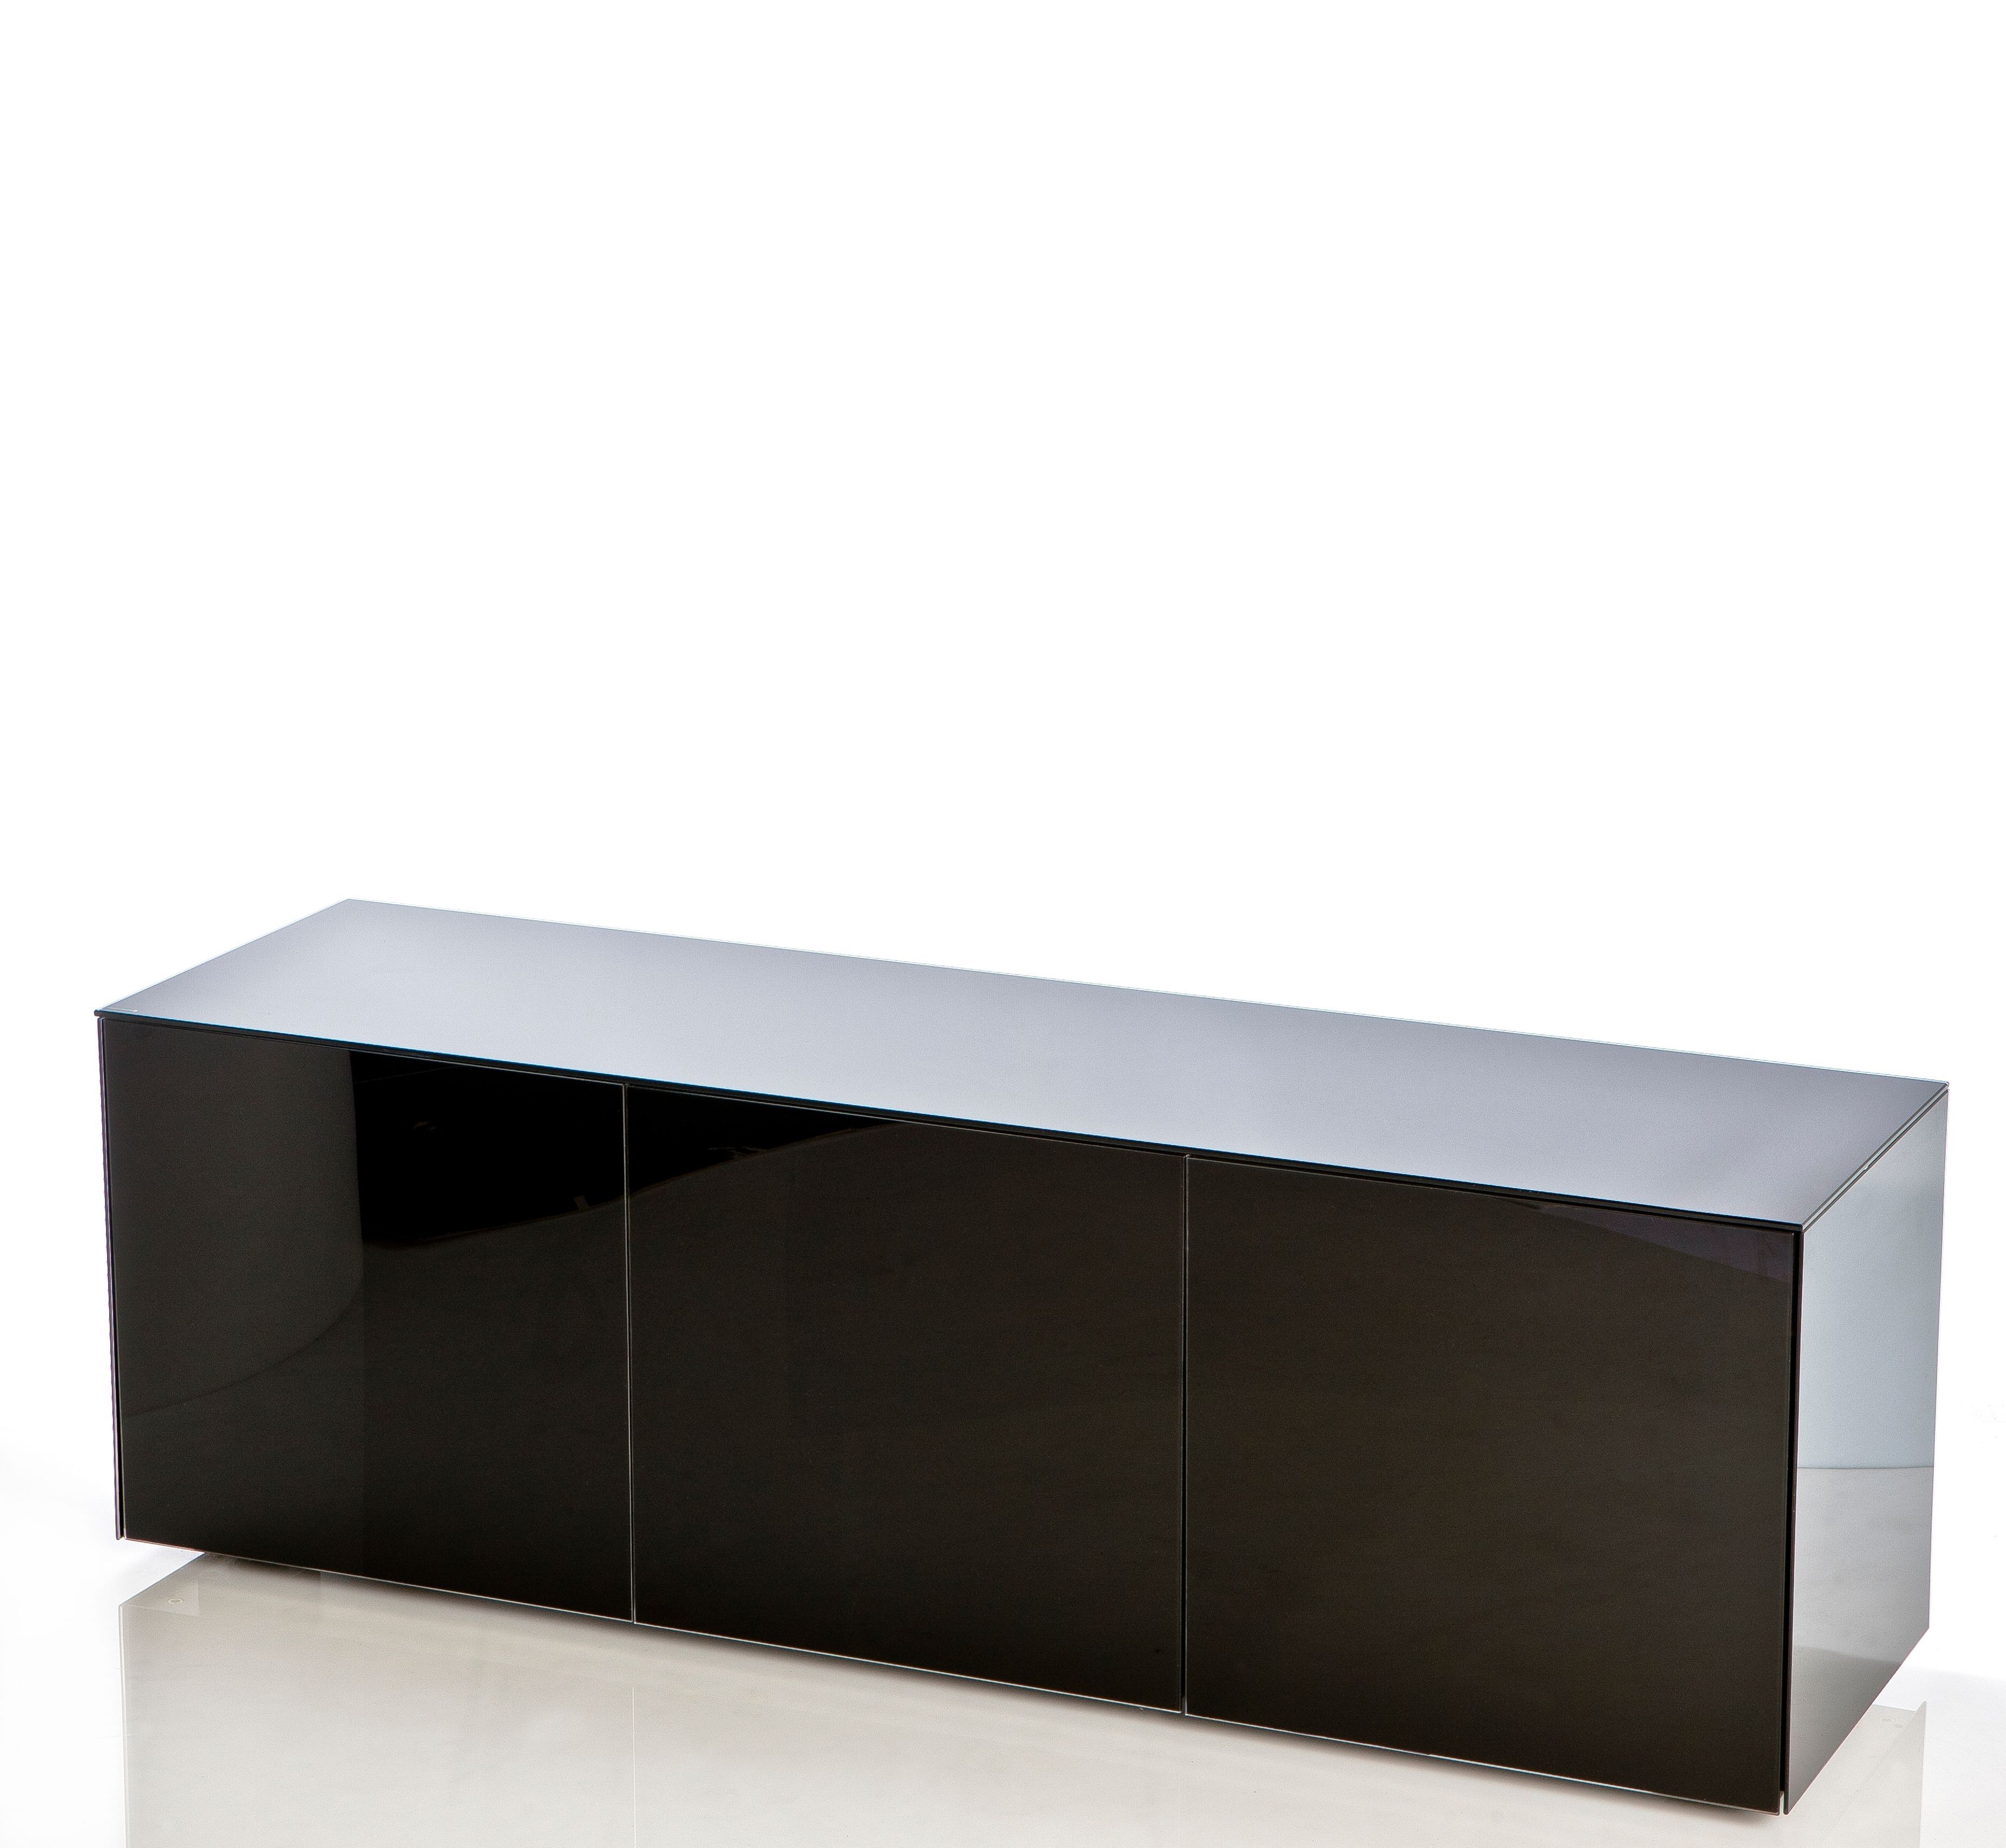 Shiny Black Tv Stands Simple Home Designs 3729×3436 Attachment Inside Trendy Shiny Black Tv Stands (View 3 of 20)